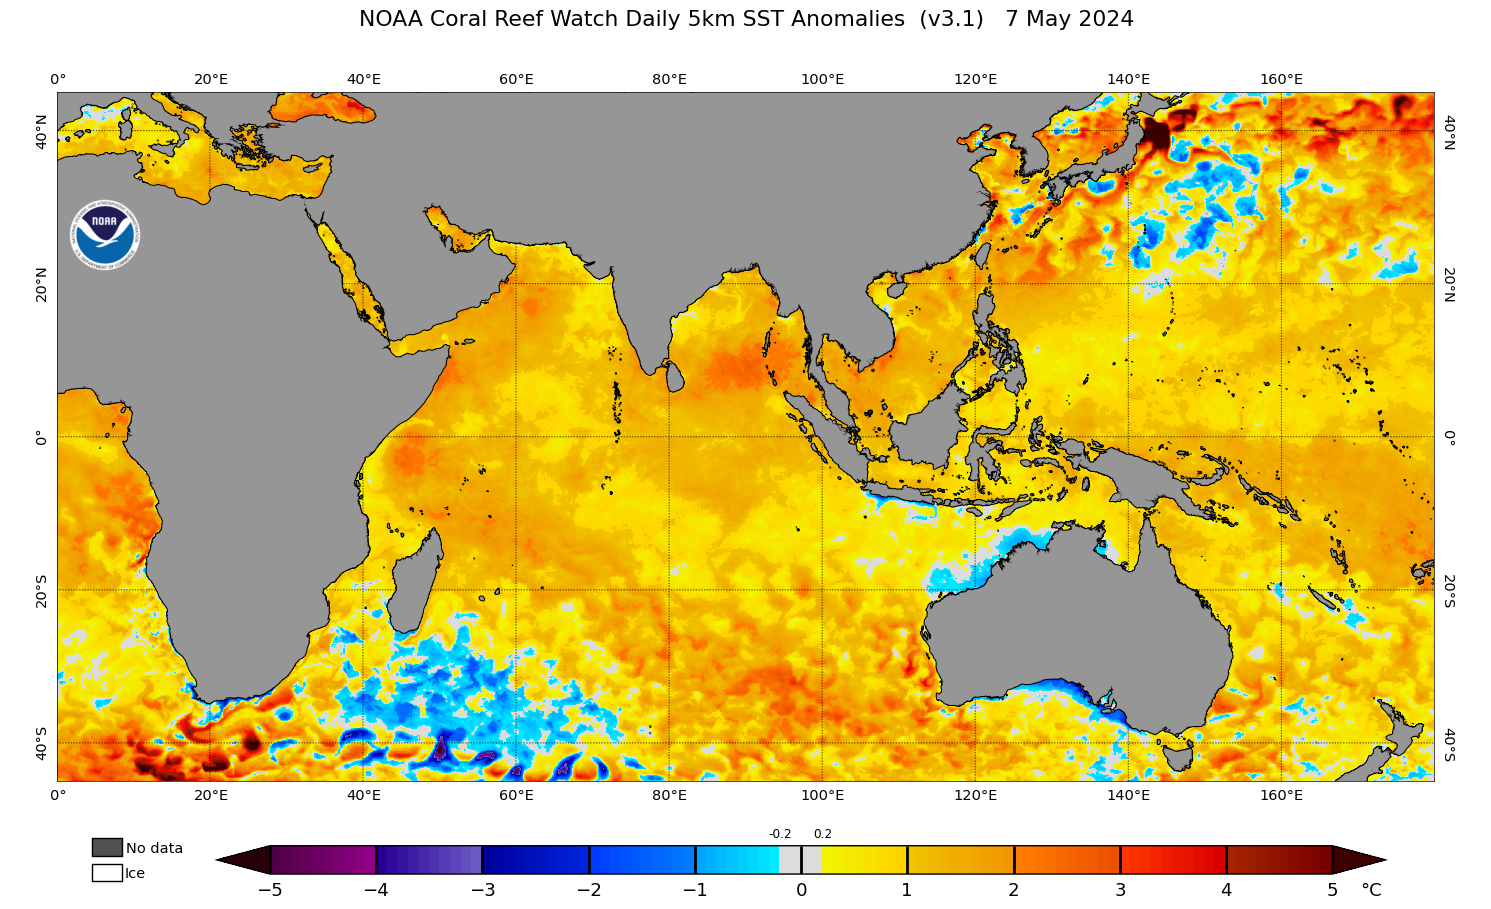 SSTA map - Sea Surface Temperature Anomalies. Zone: East